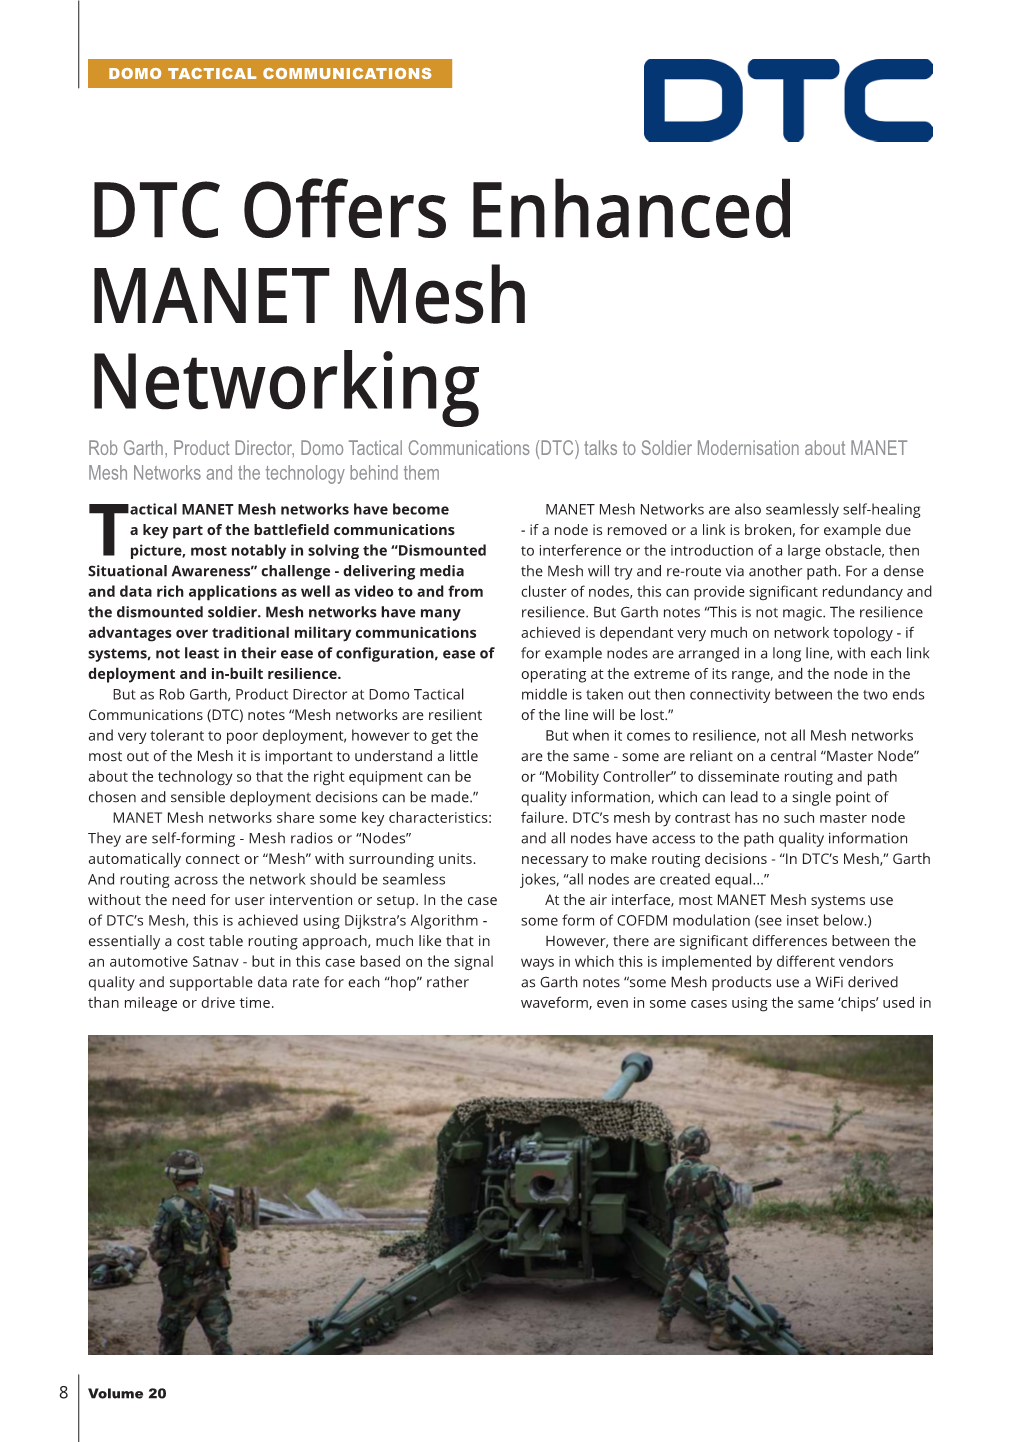 DTC Offers Enhanced MANET Mesh Networking